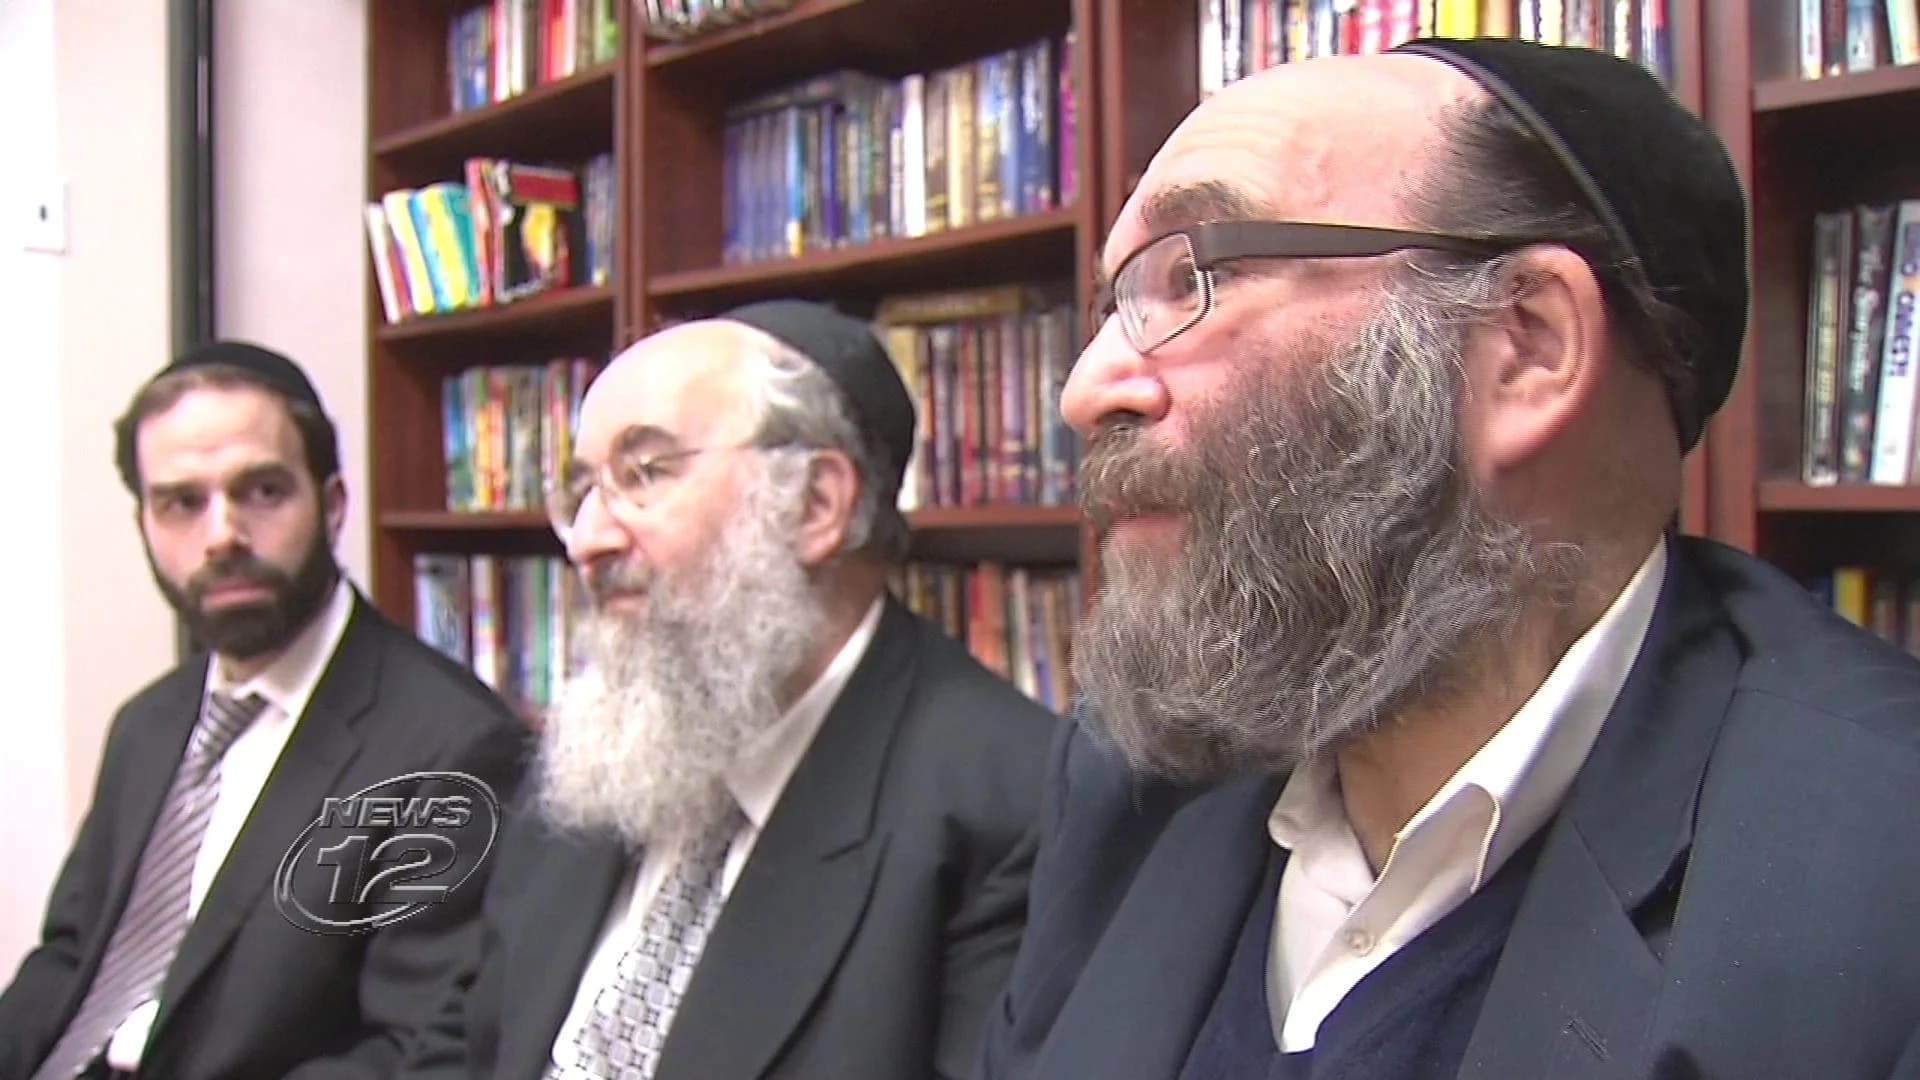 Playing With Fire: Rabbis say they are targeted